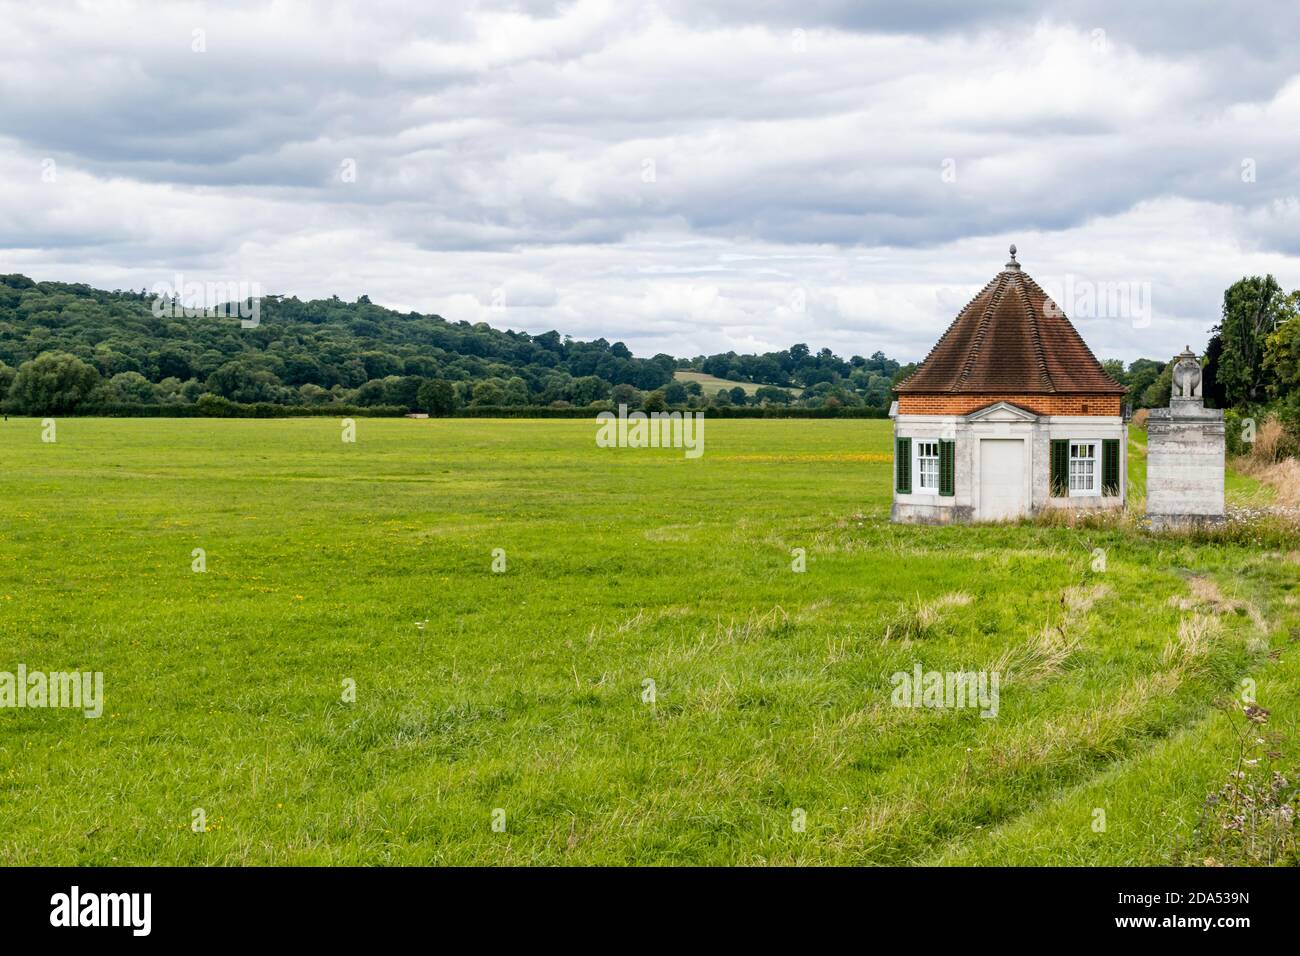 Windsor, United Kingdom - 26/07/2020: One of the Pair of Lutyens Kiosks on the Runnymede meadow, historic building commissioned by Lady Fairhaven from Stock Photo